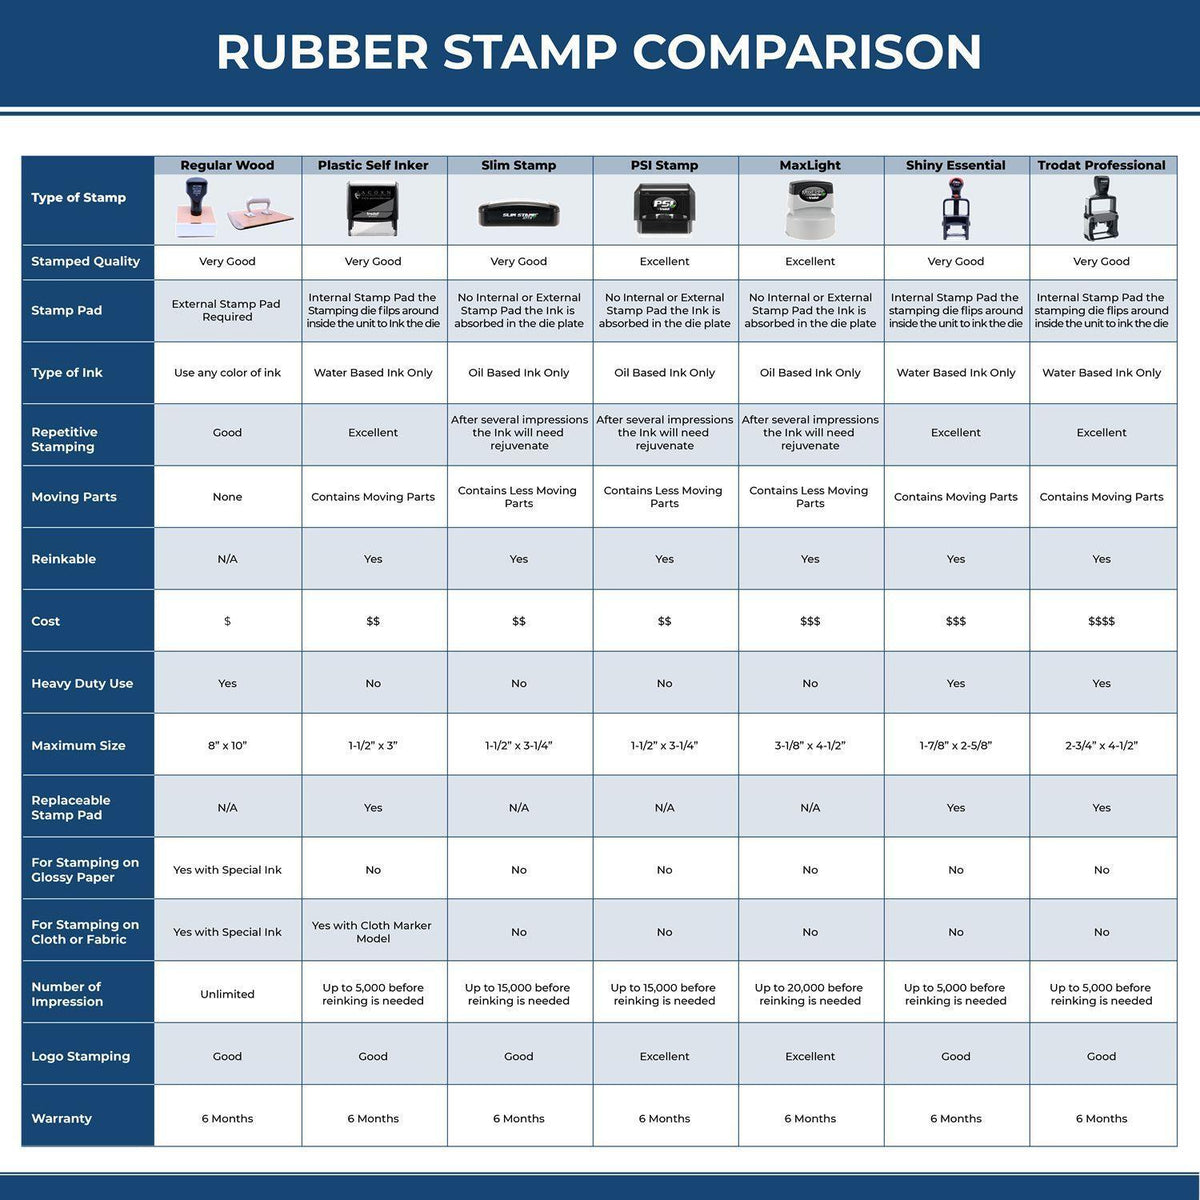 Large Pre Inked Read Route Stamp 4666SLIM Rubber Stamp Comparison